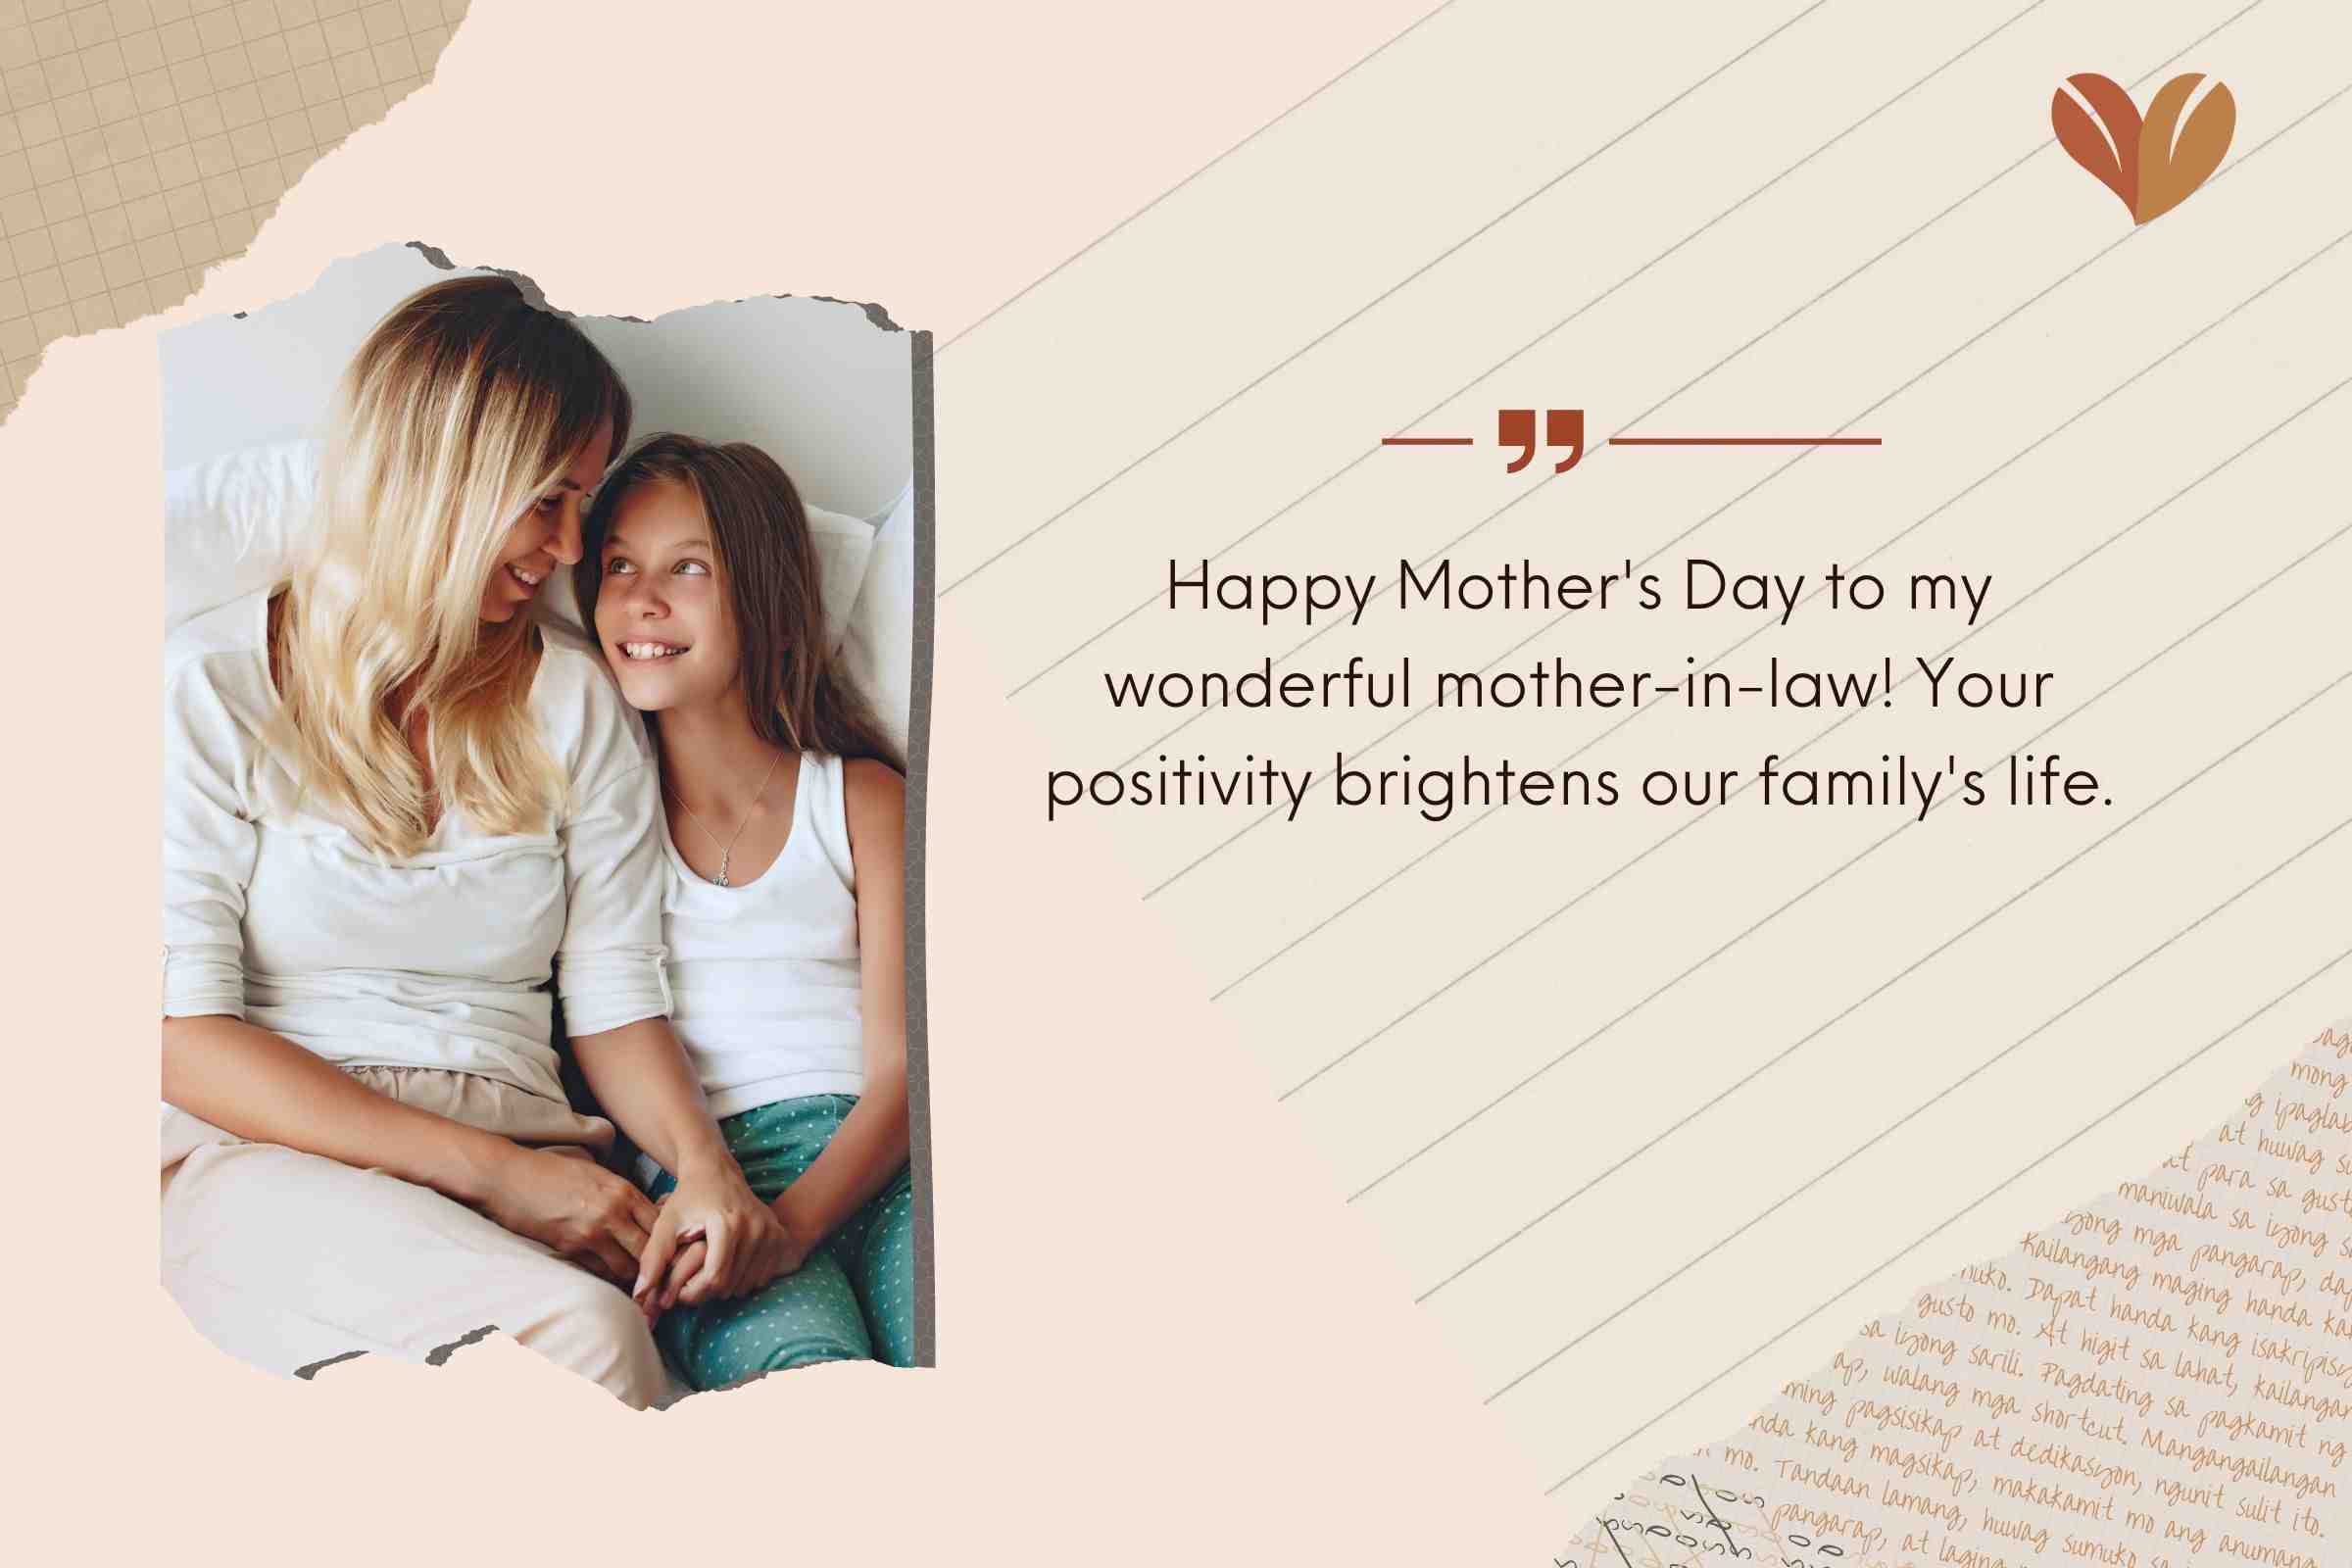 Positive Mother-in-Law Mother’s Day messages